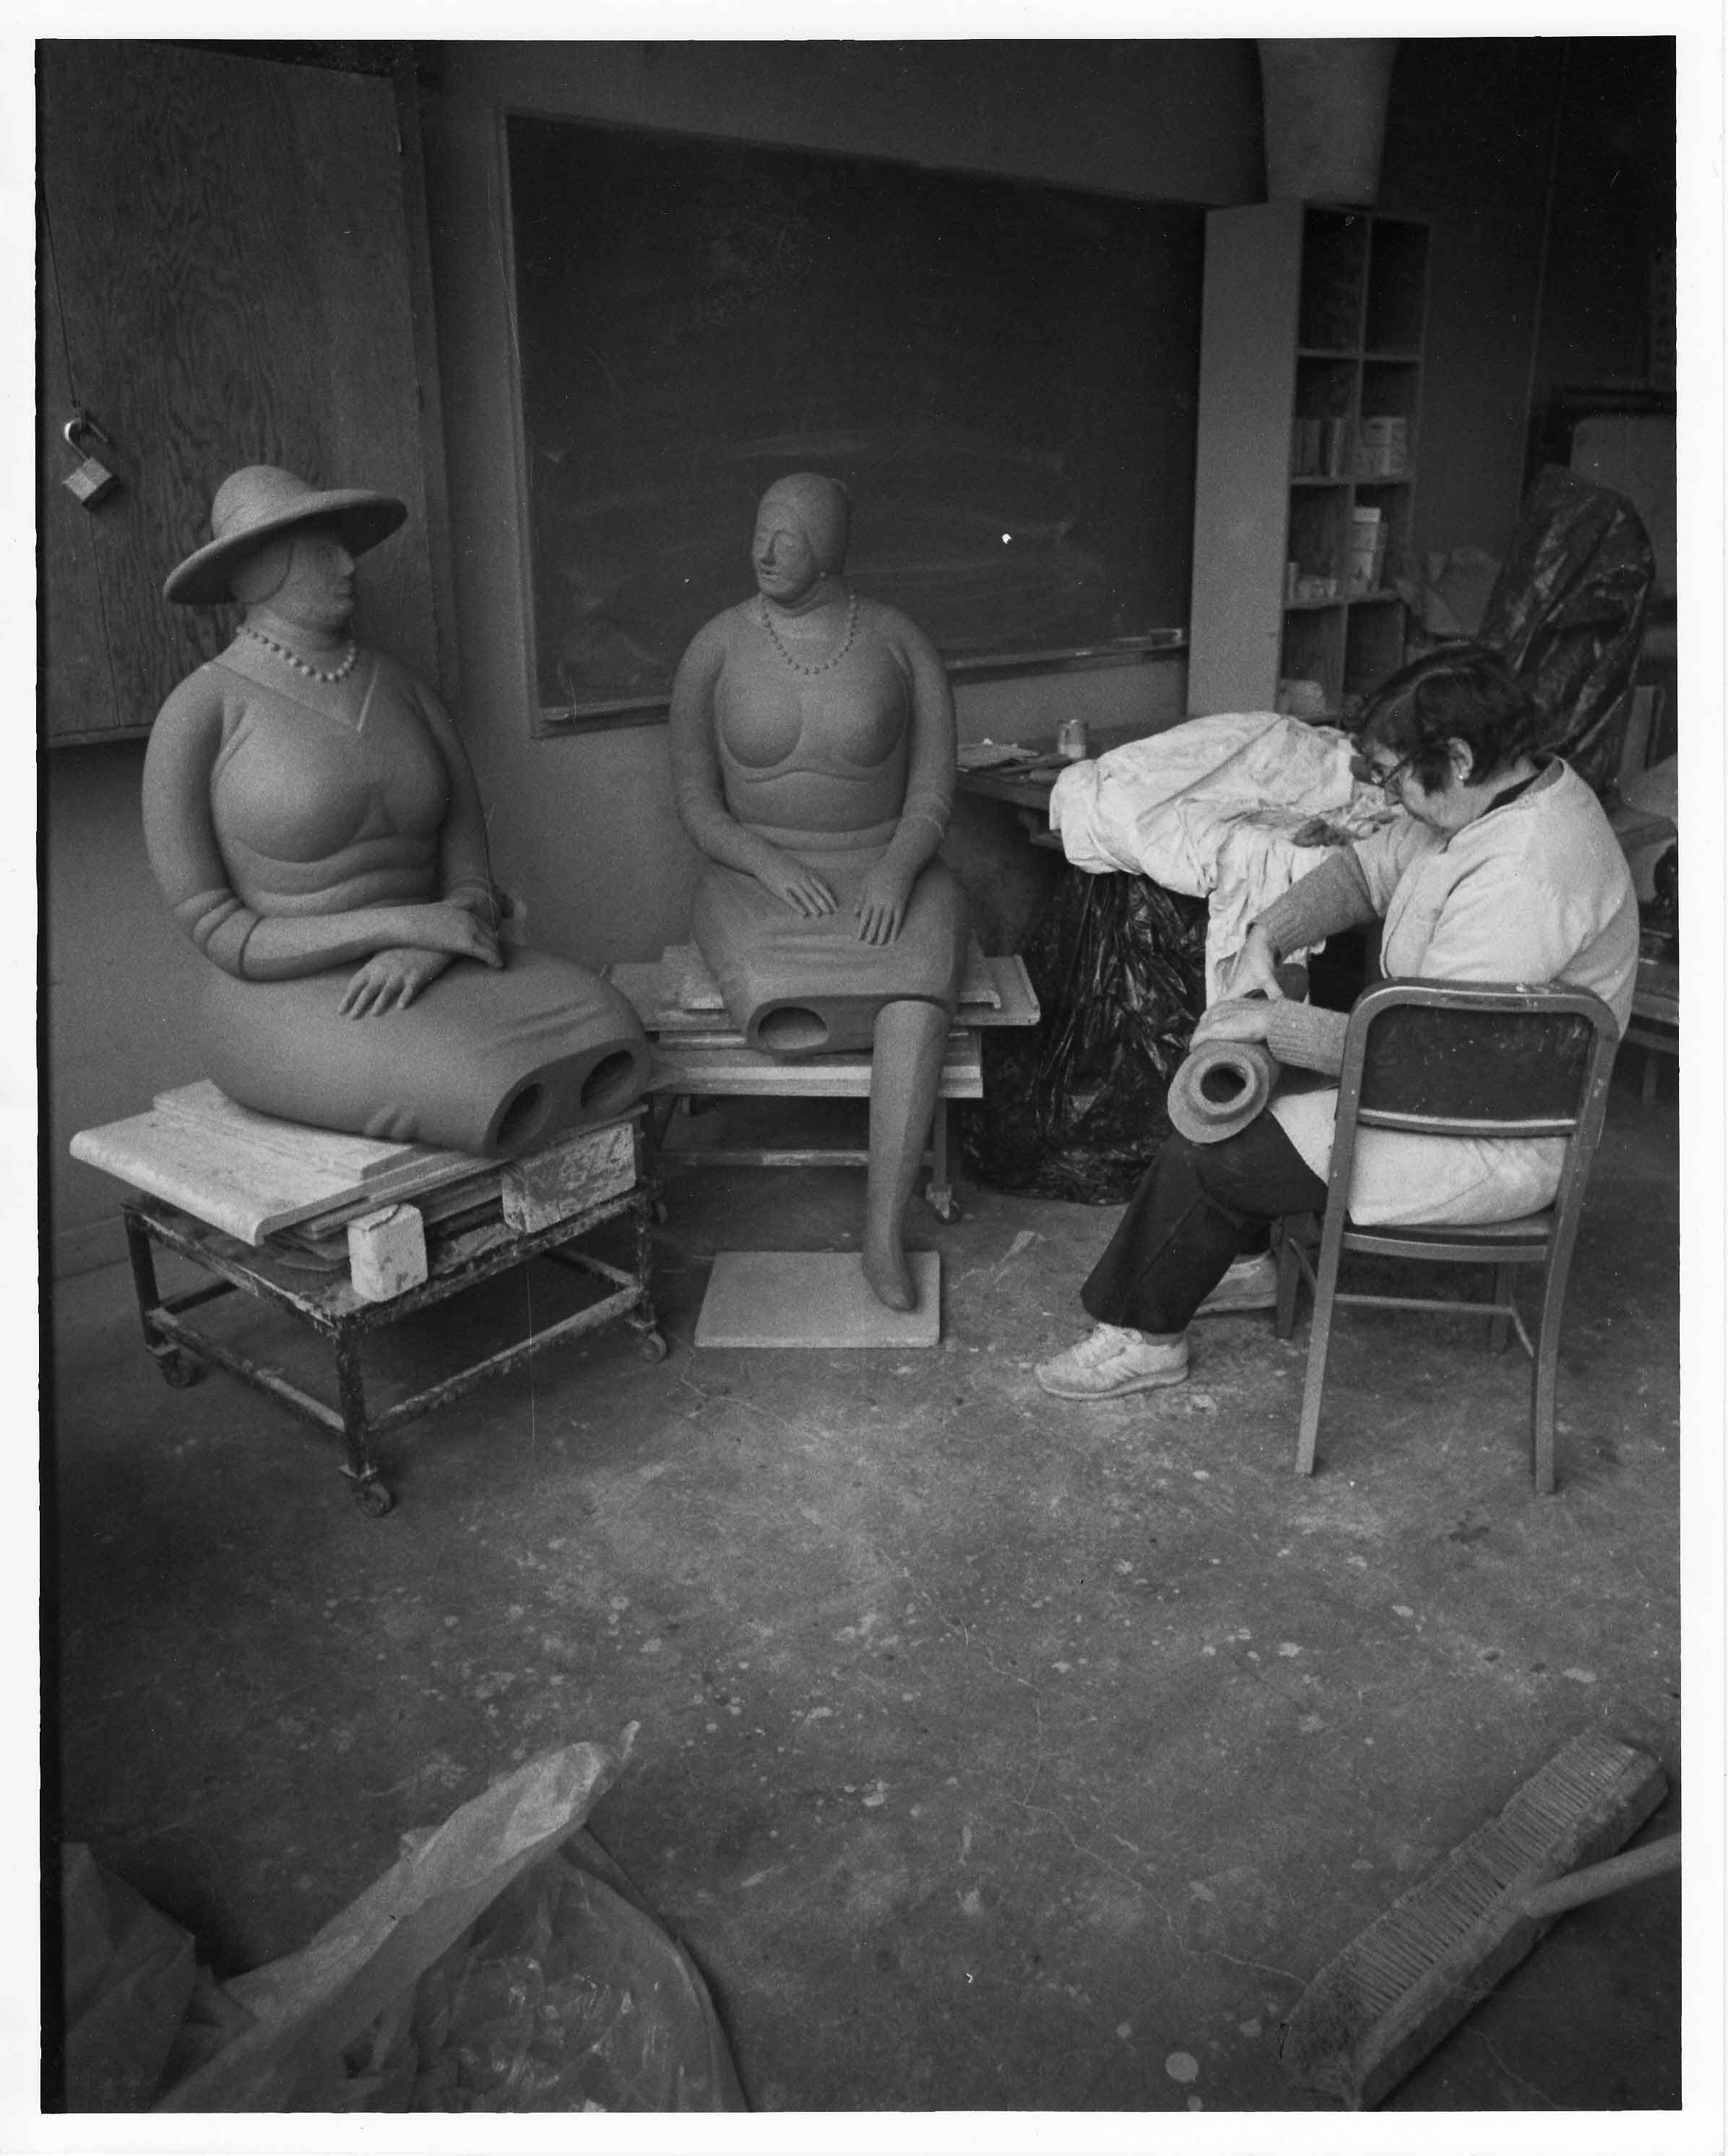 Ruth Rippon in her academic studio working on her Pavillions commission, c. 1980. Photo credit, Earl Fox.